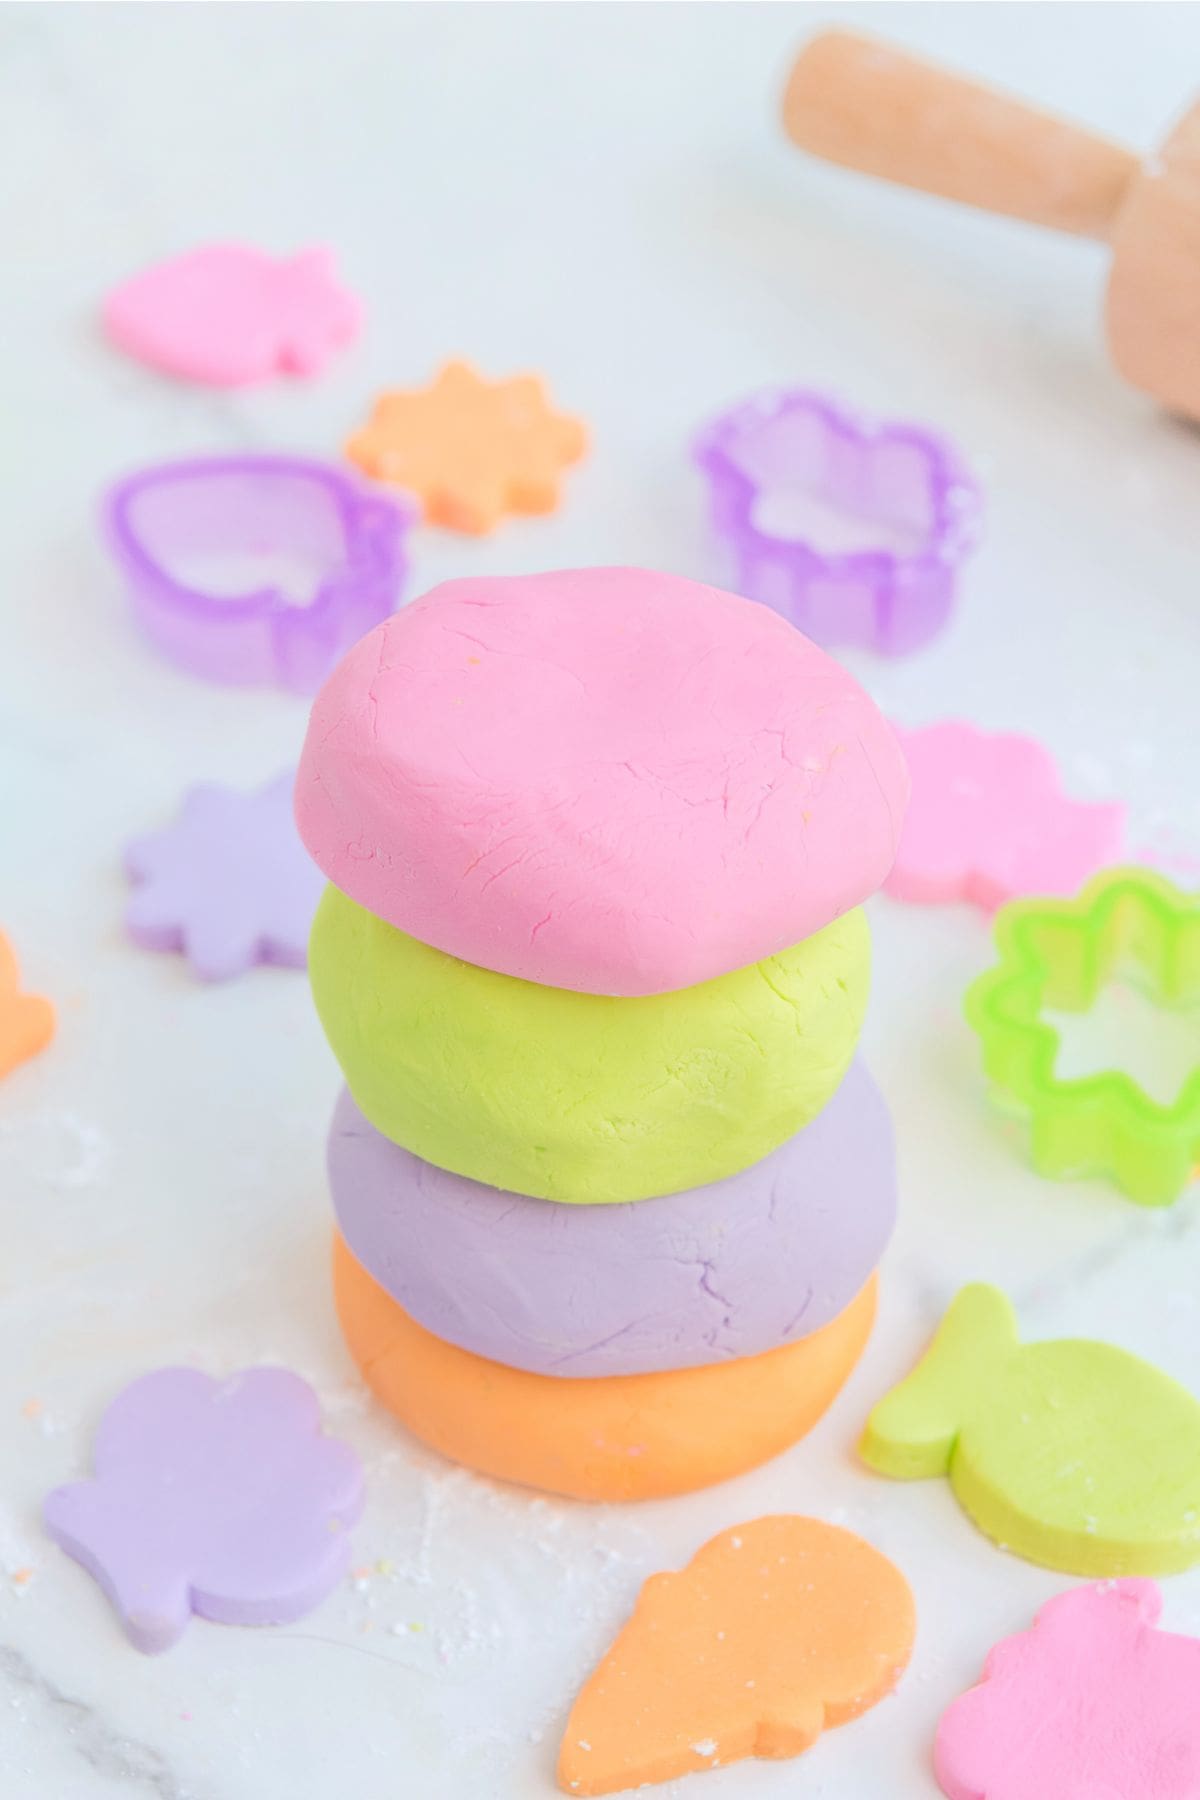 Edible Playdough stacked up on the table.